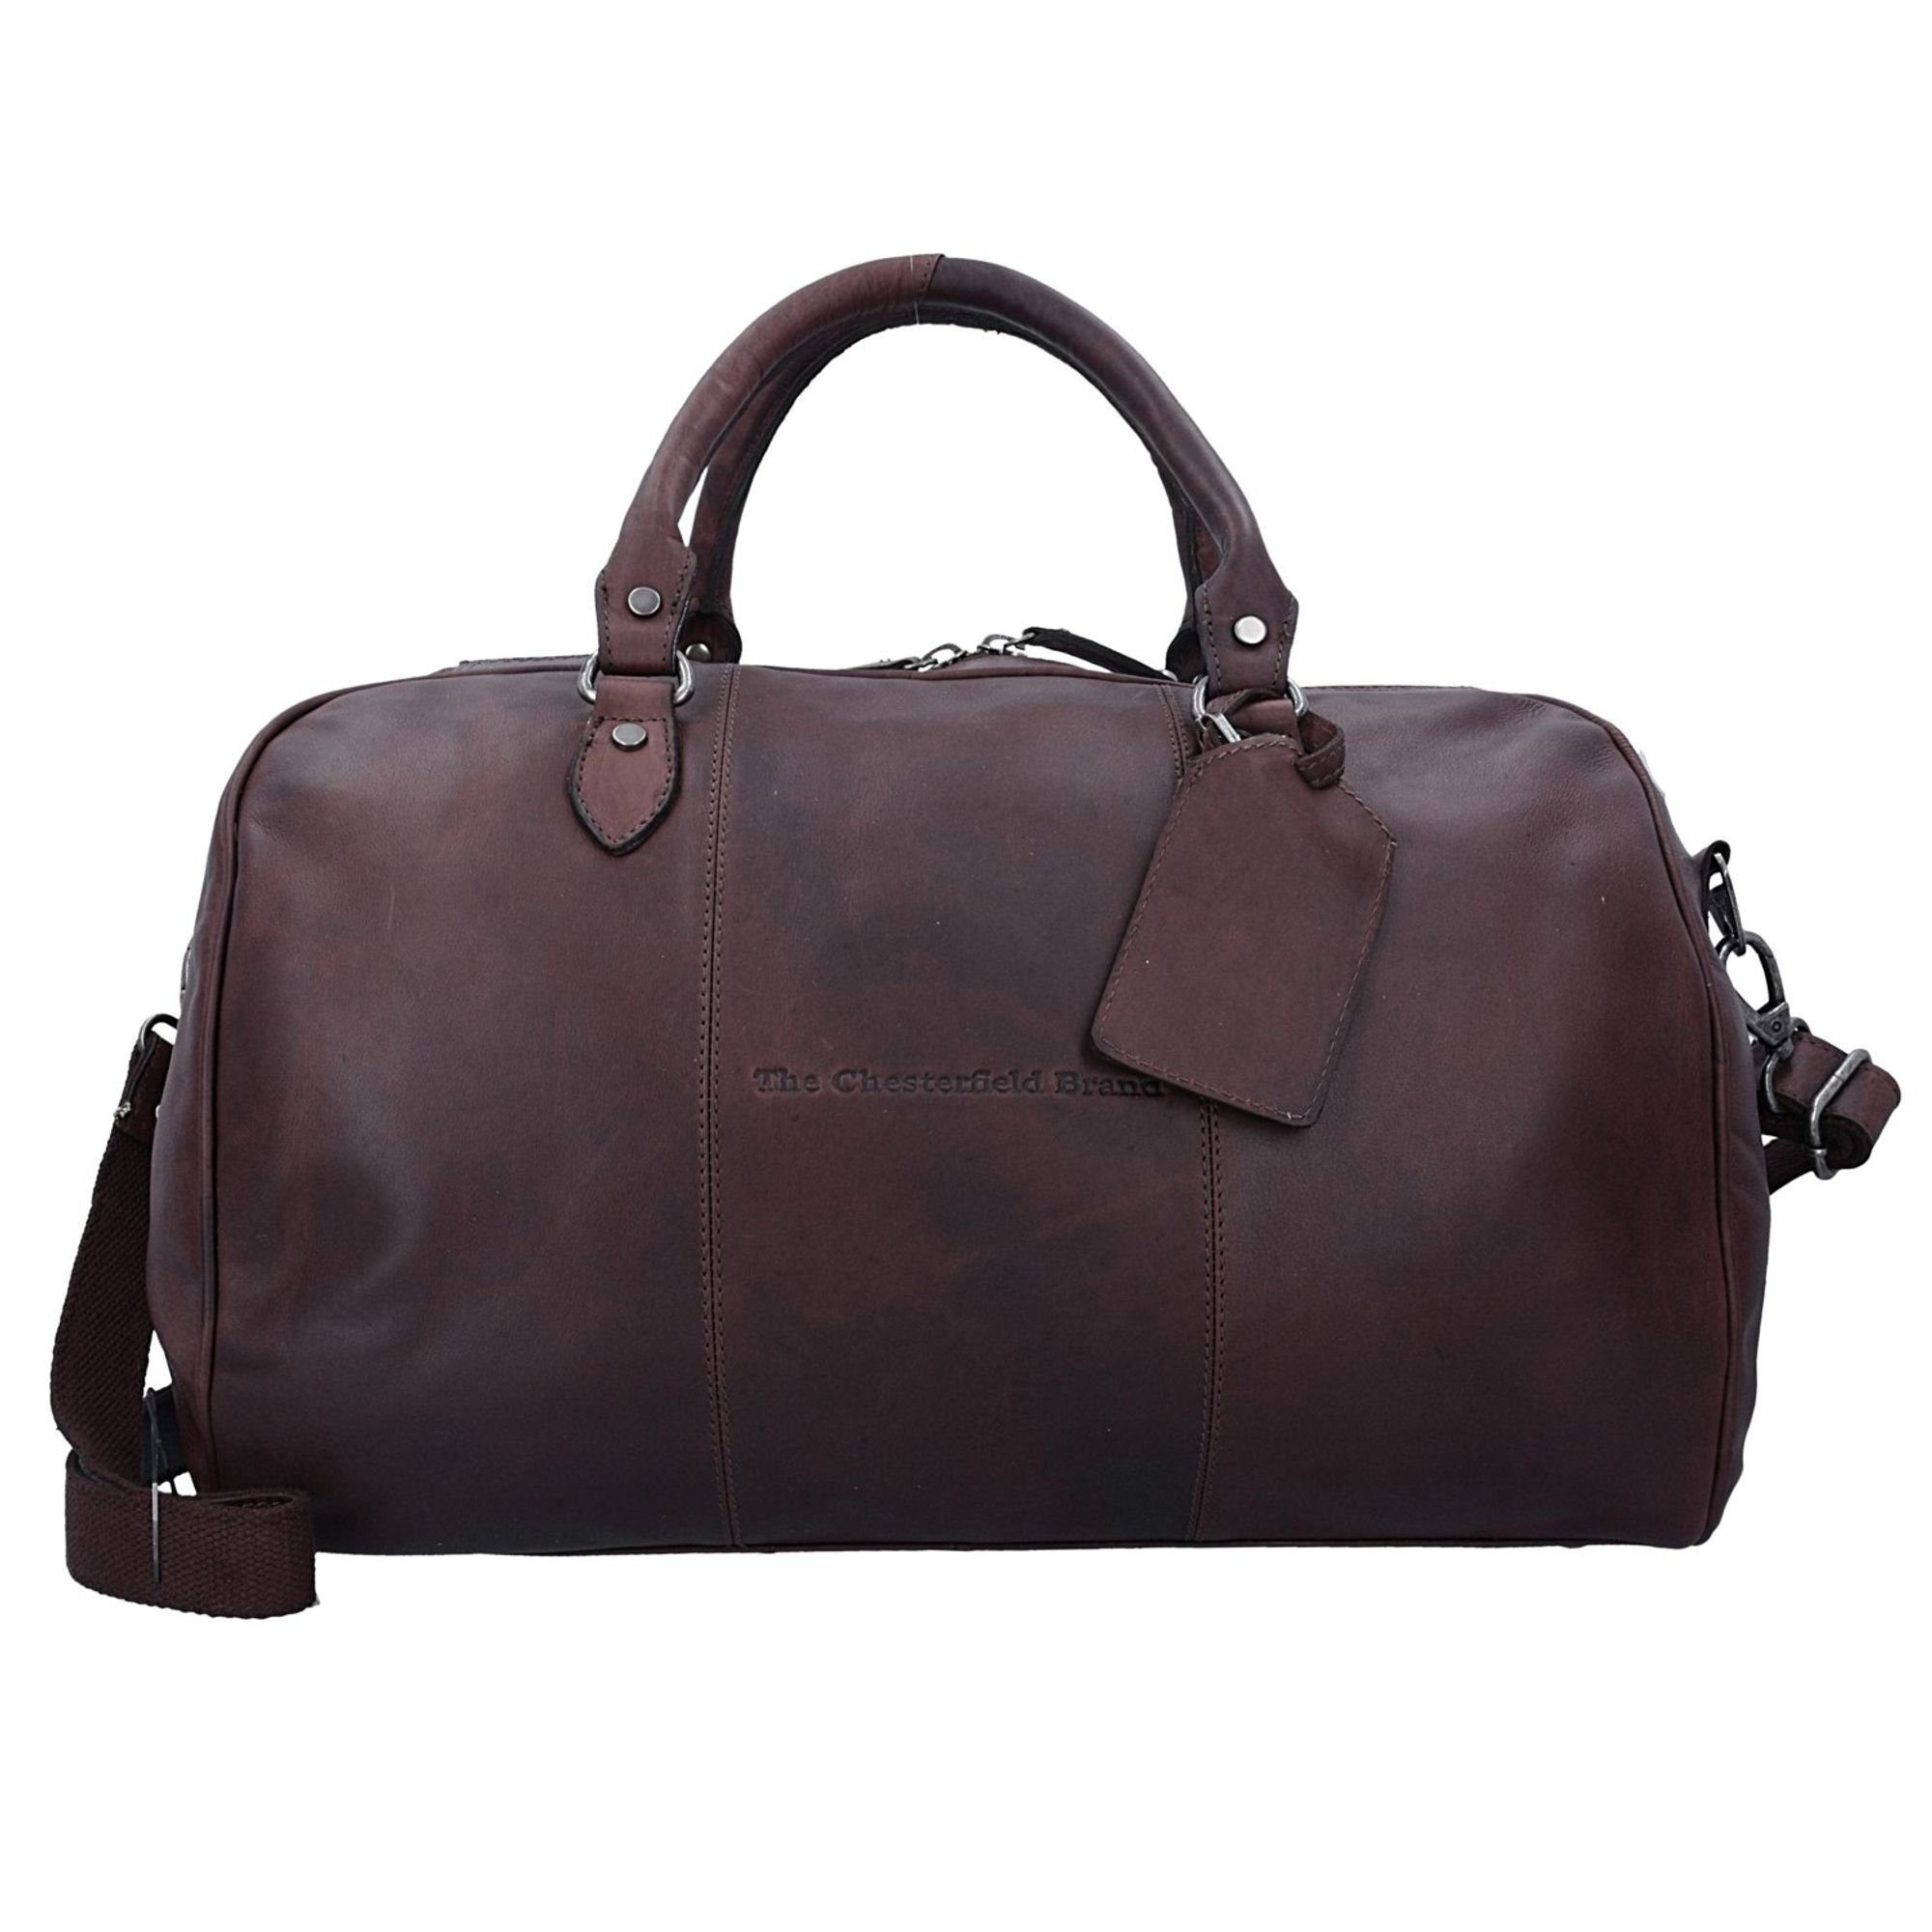 Pull The Leder Brand Chesterfield Weekender Up, Wax brown